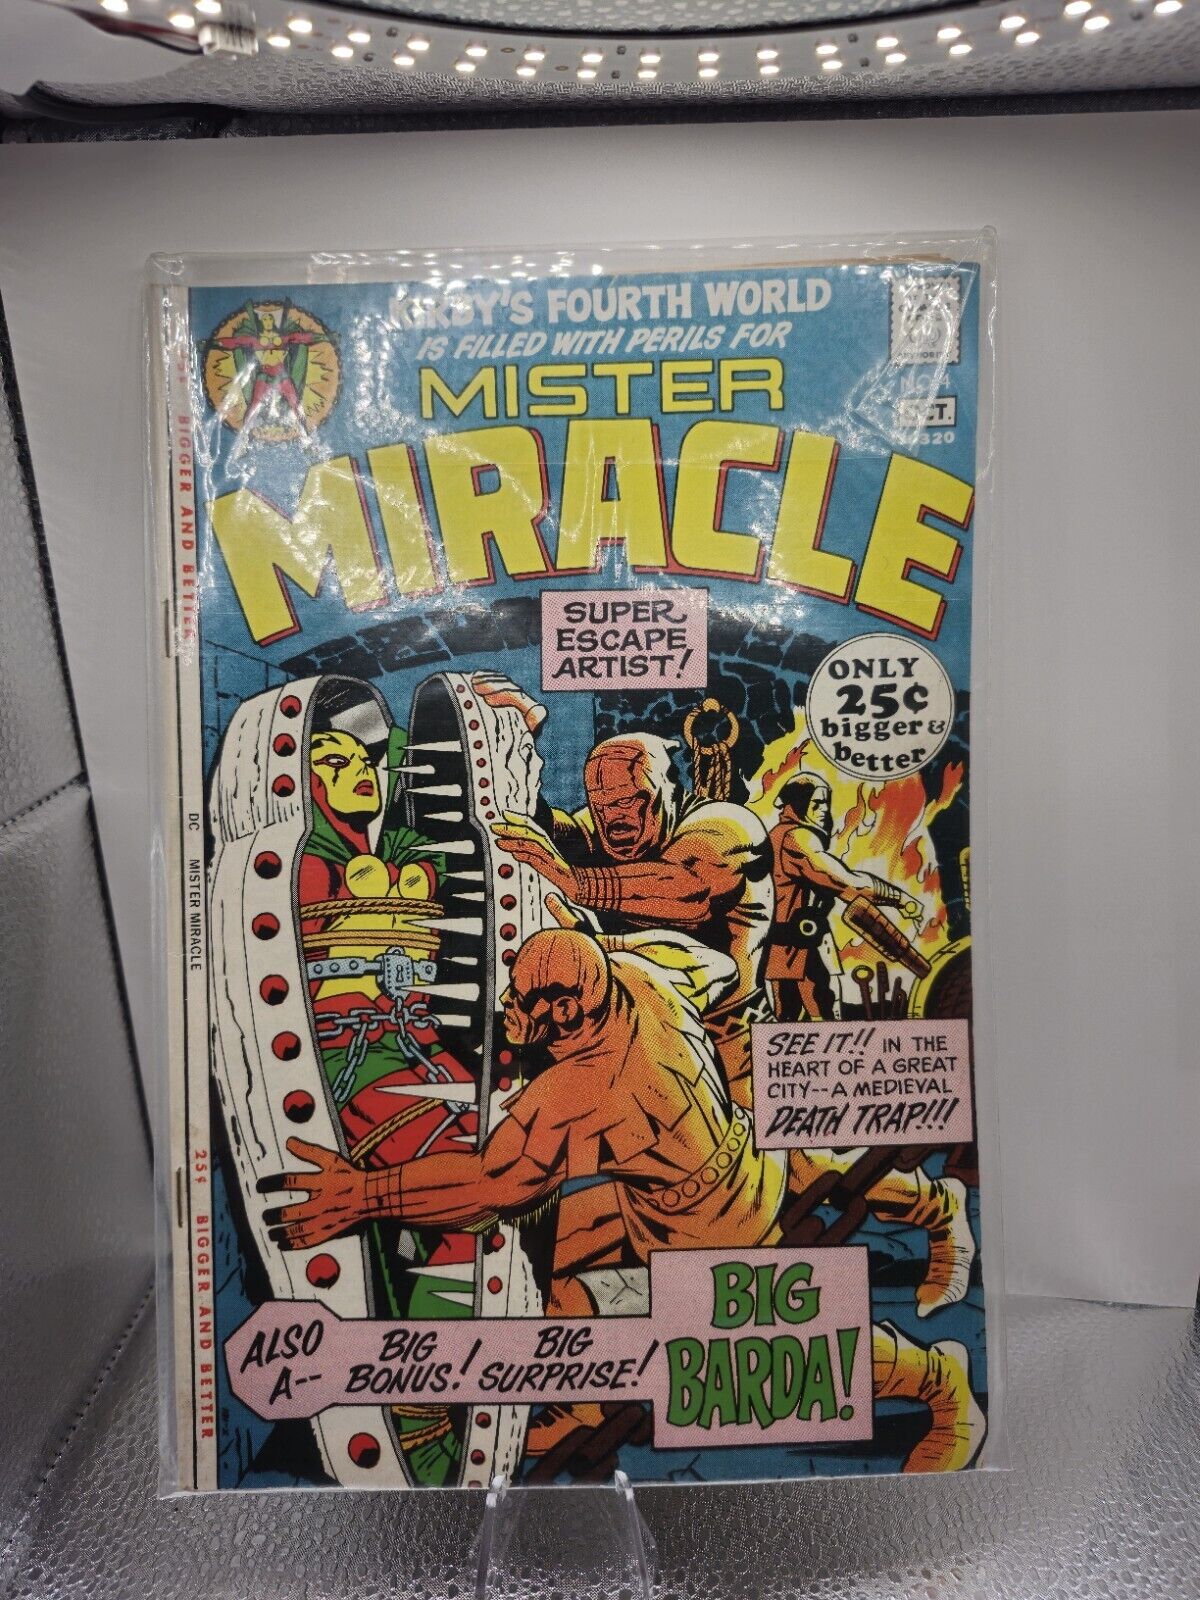 MISTER MIRACLE #4 Key Issue - 1st appearance of Big Barda